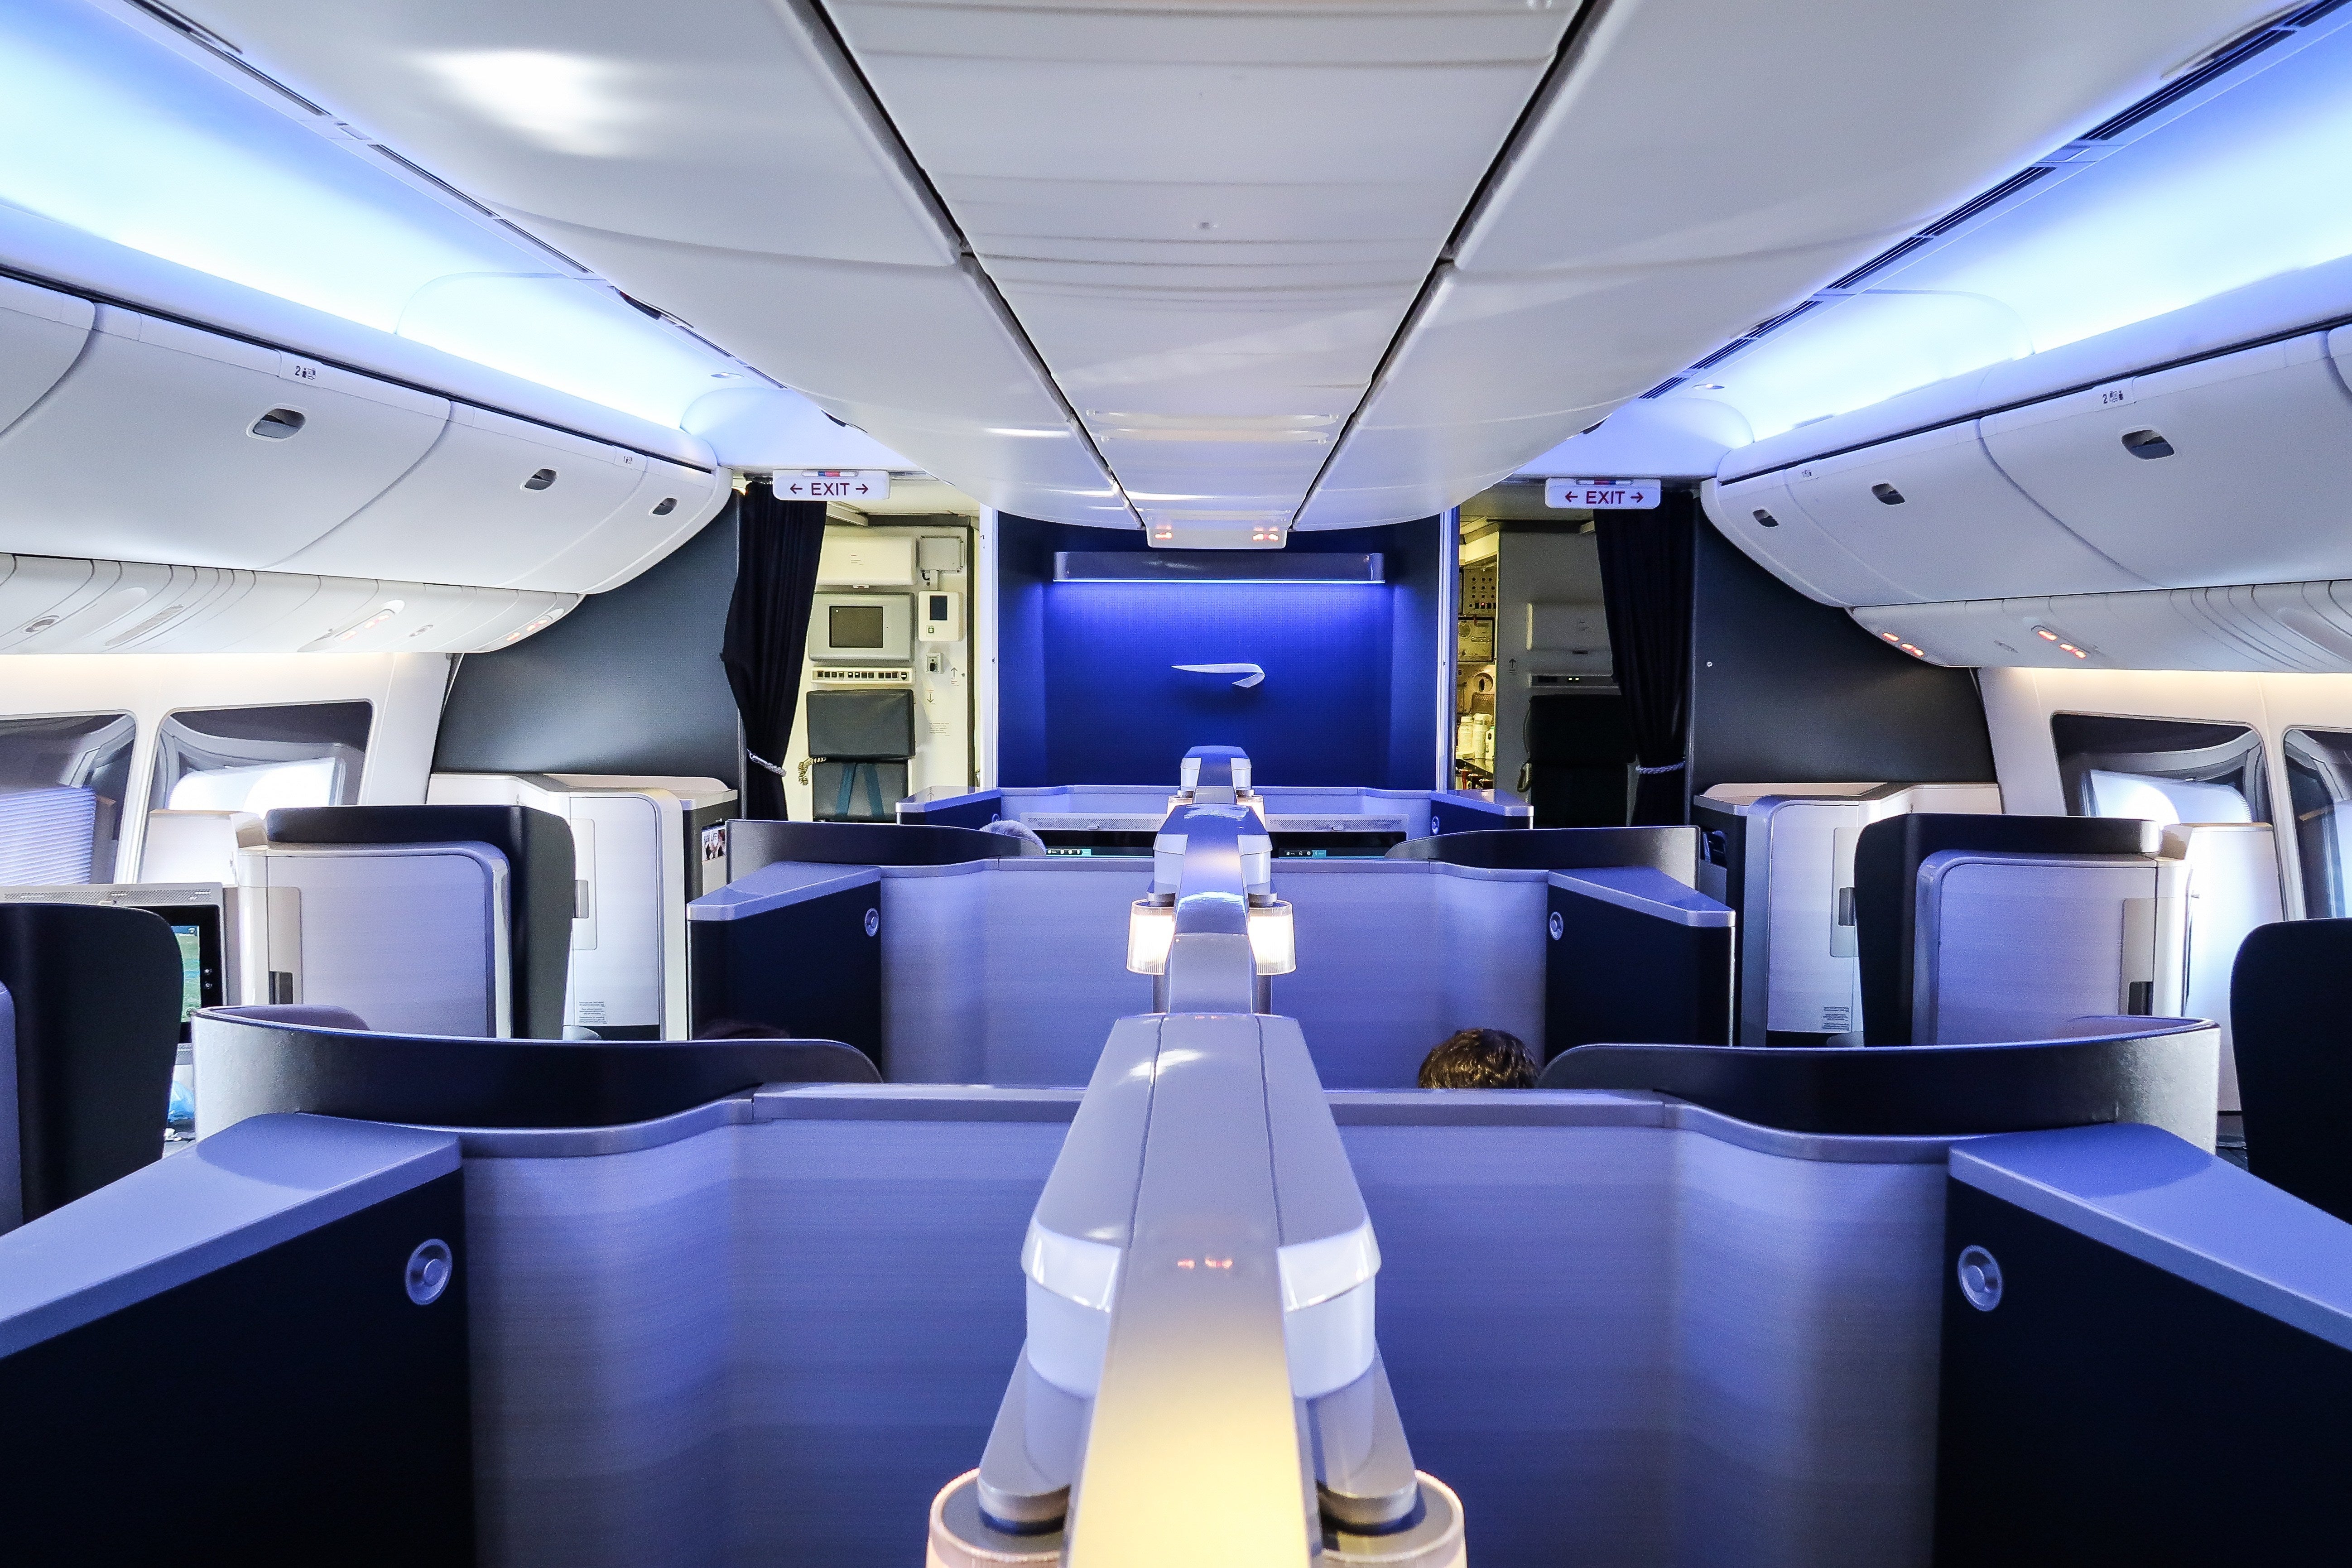 Which British Airways routes have first class Avios award availability?